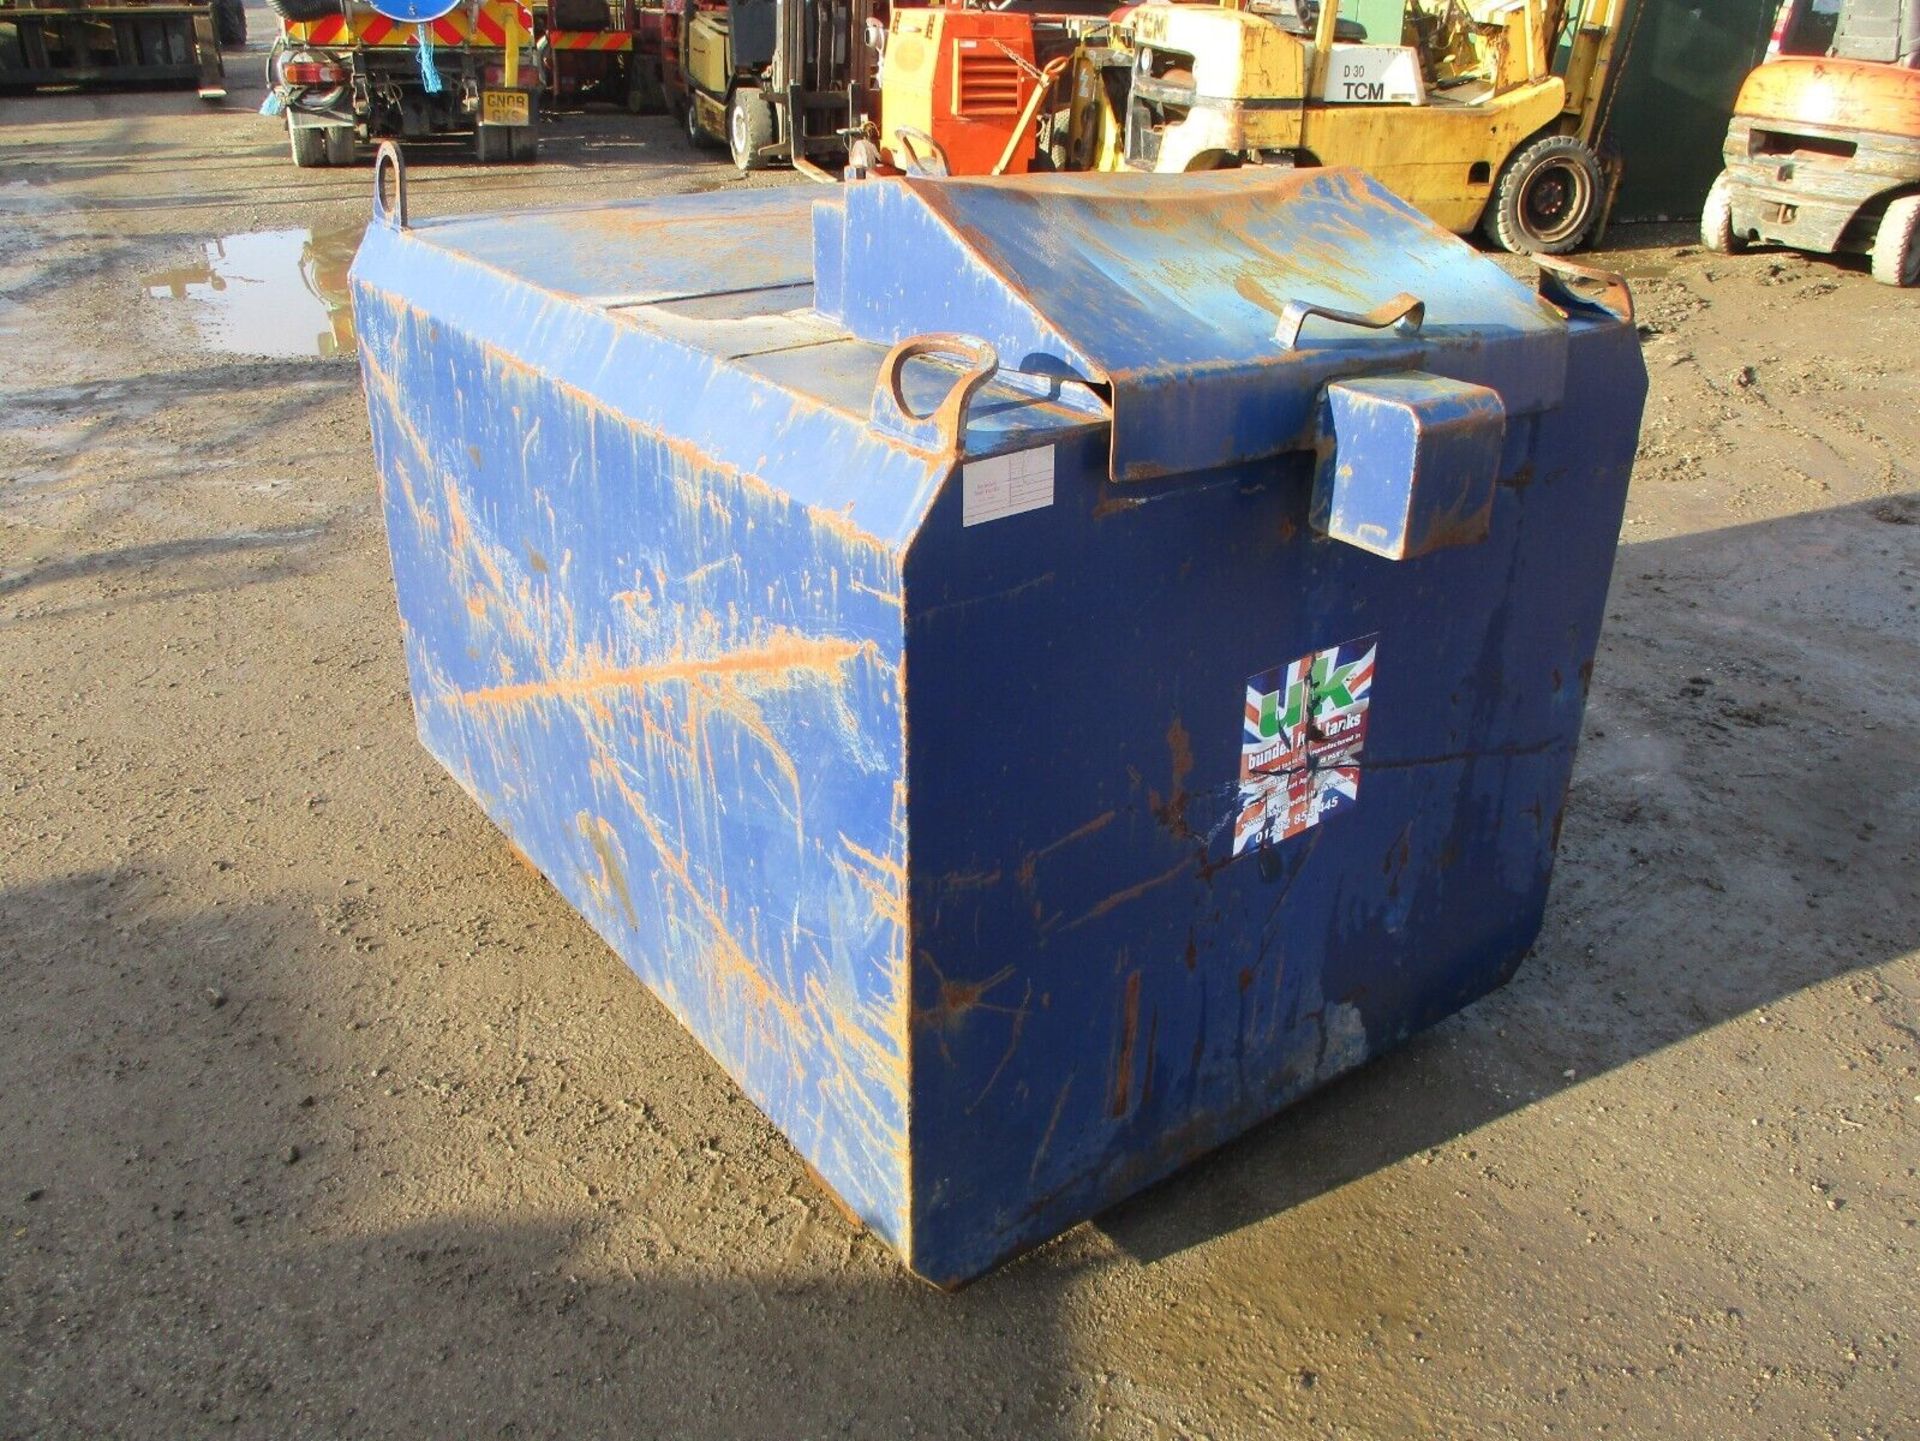 WITH HAND PUMP 1000 LITRE BUNDED FUEL TANK - Image 4 of 6